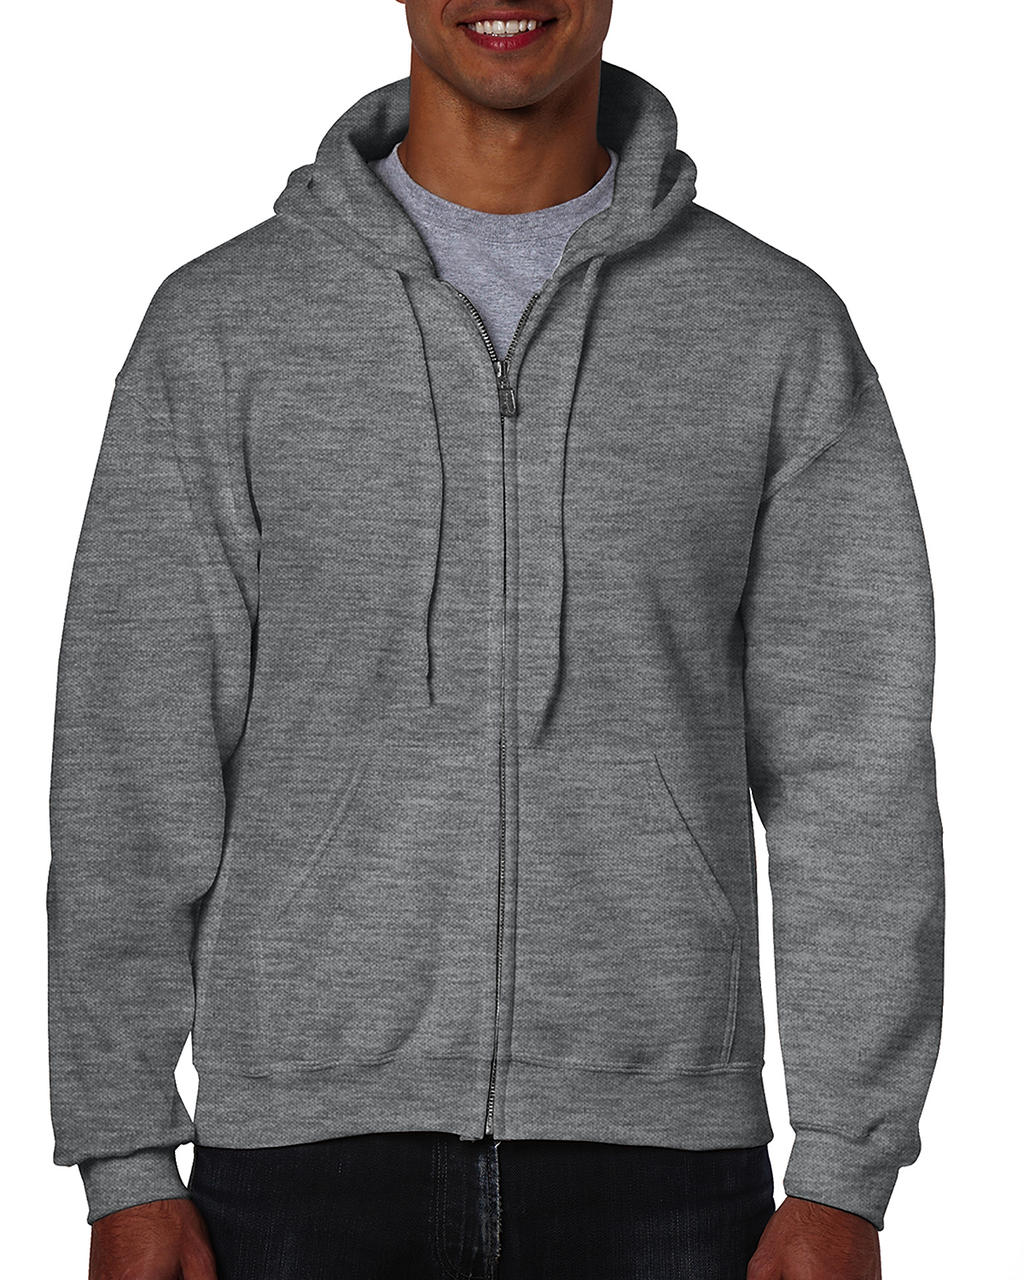  Heavy Blend Adult Full Zip Hooded Sweat in Farbe Graphite Heather